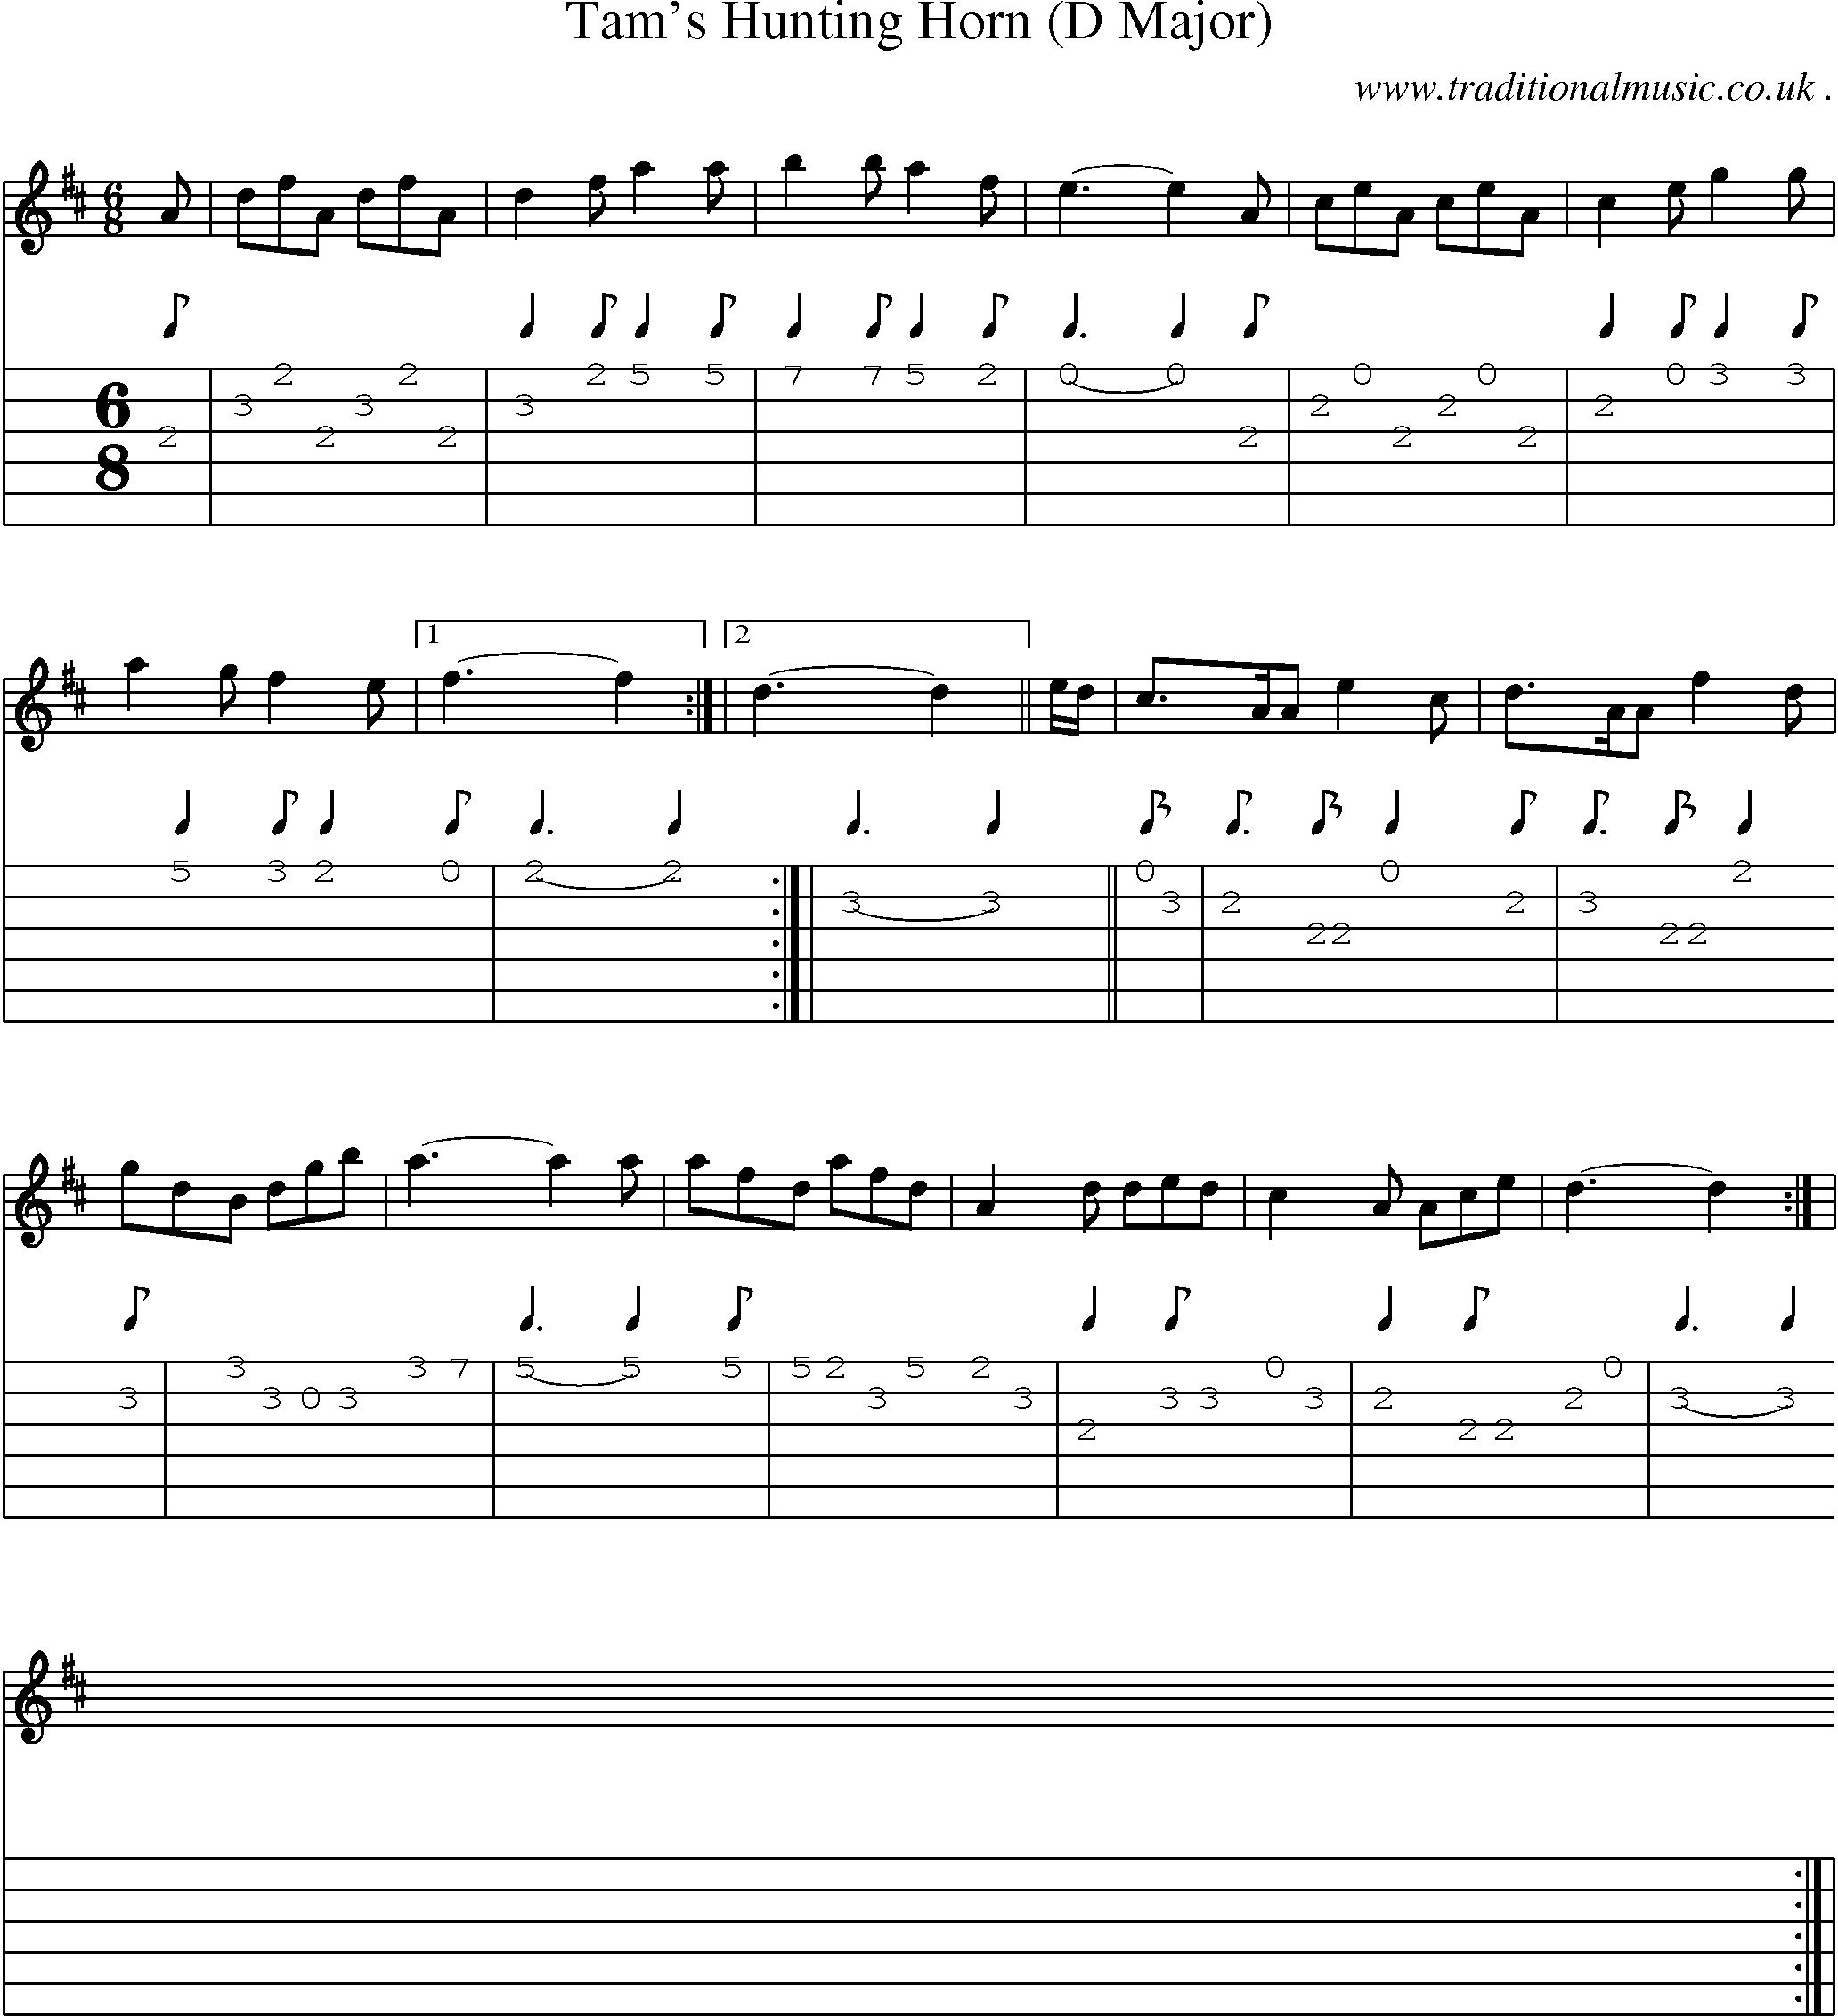 Sheet-music  score, Chords and Guitar Tabs for Tams Hunting Horn D Major